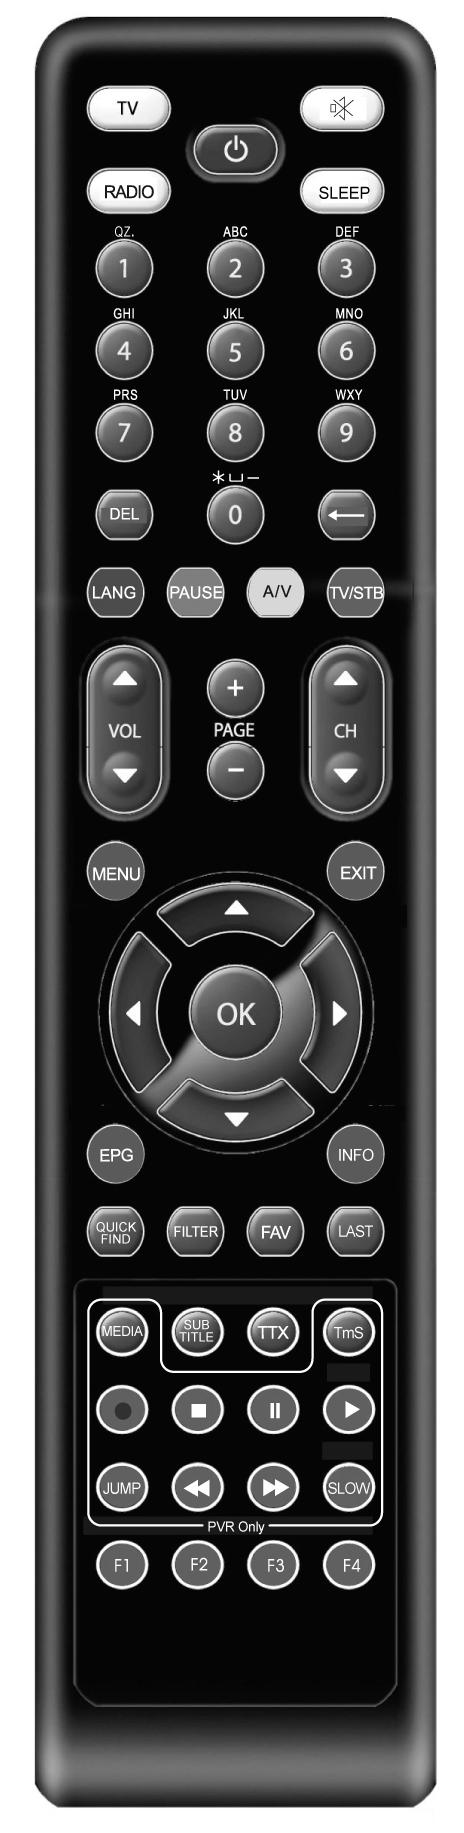 B. Remote controller Buttons POWER Watching TV status (Live mode) Turns the receiver on/off. OSD operating status (OSD mode) 1~0 Access specific channel directly.